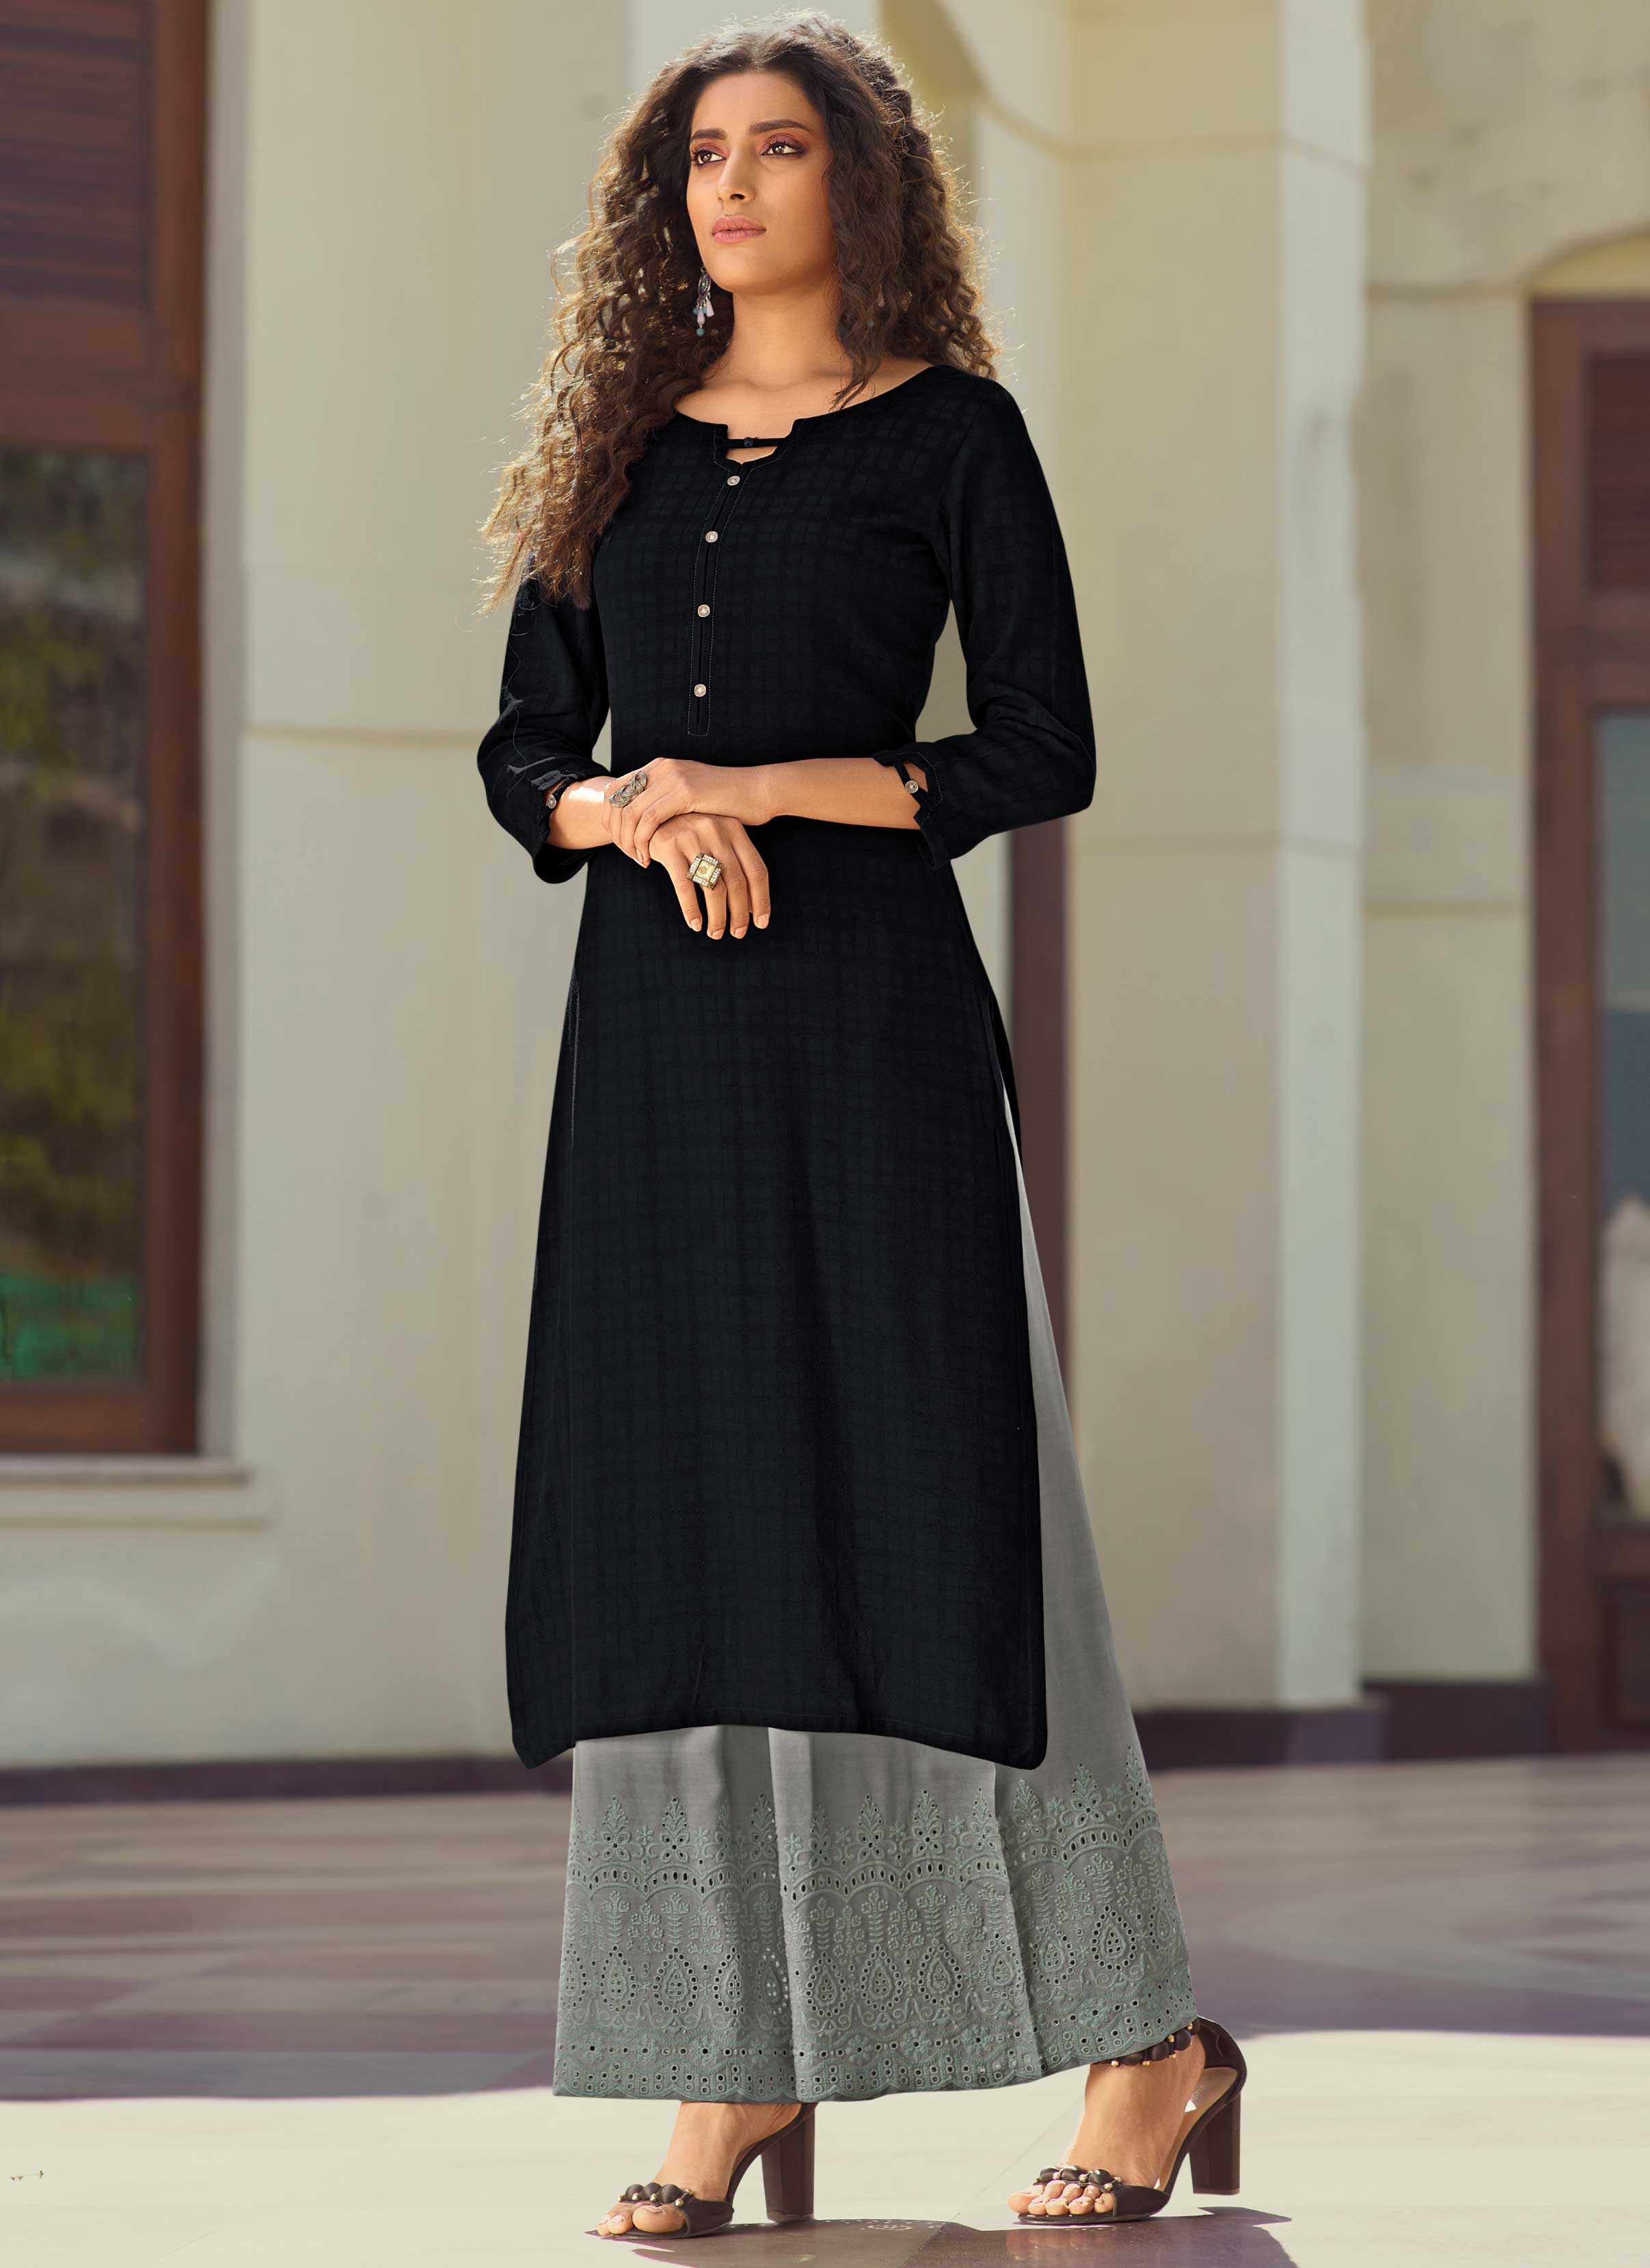 Black Embroidery Kurti with Yellow Printed Palazzo: Gift/Send Fashion and  Lifestyle Gifts Online J11026963 |IGP.com